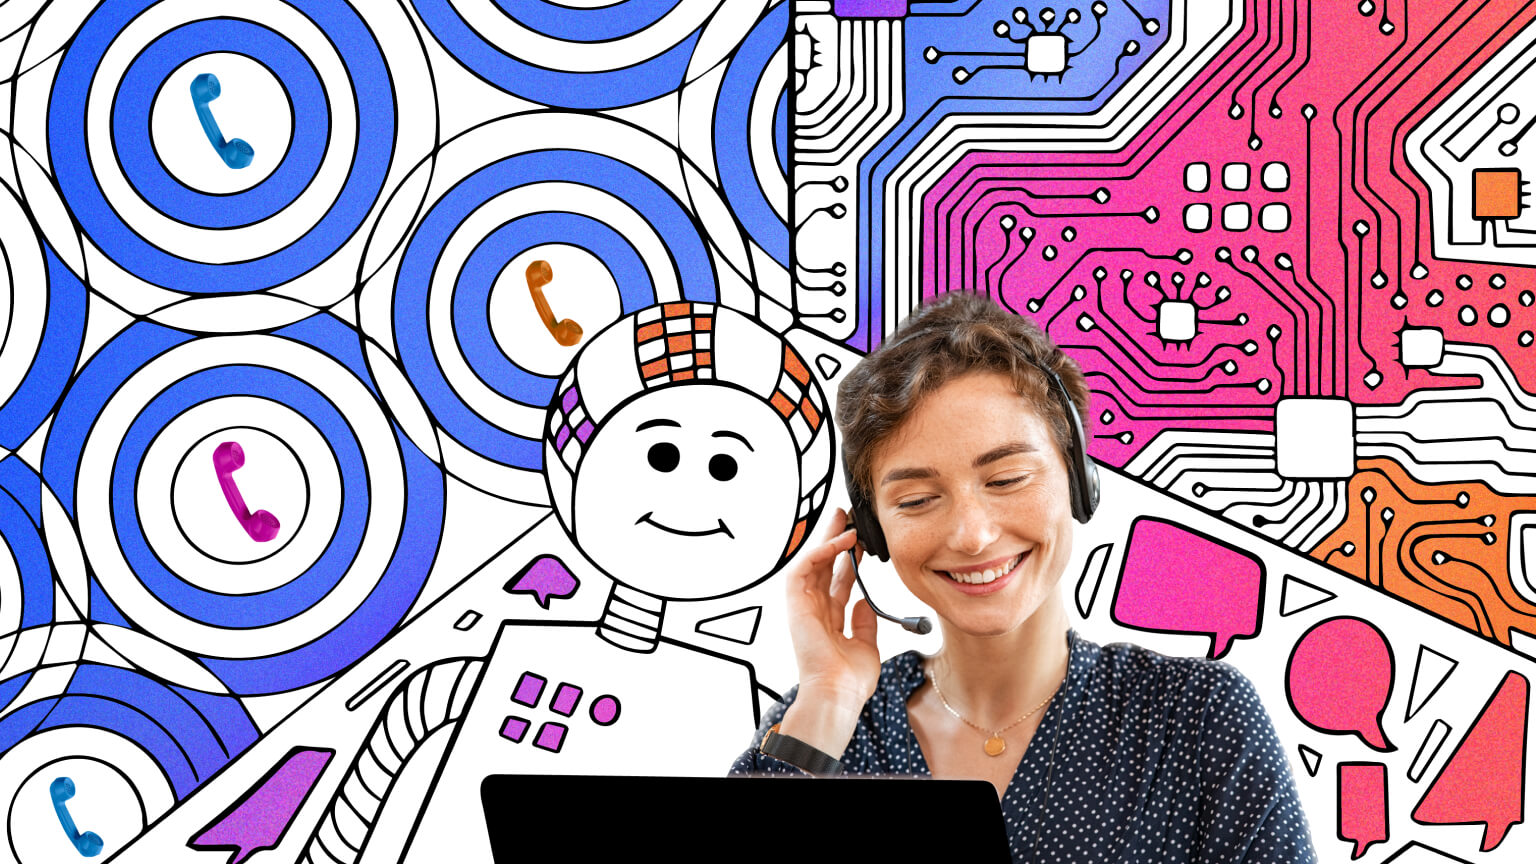 Illustrated Conversational AI chatbot helping customer service leaders respond